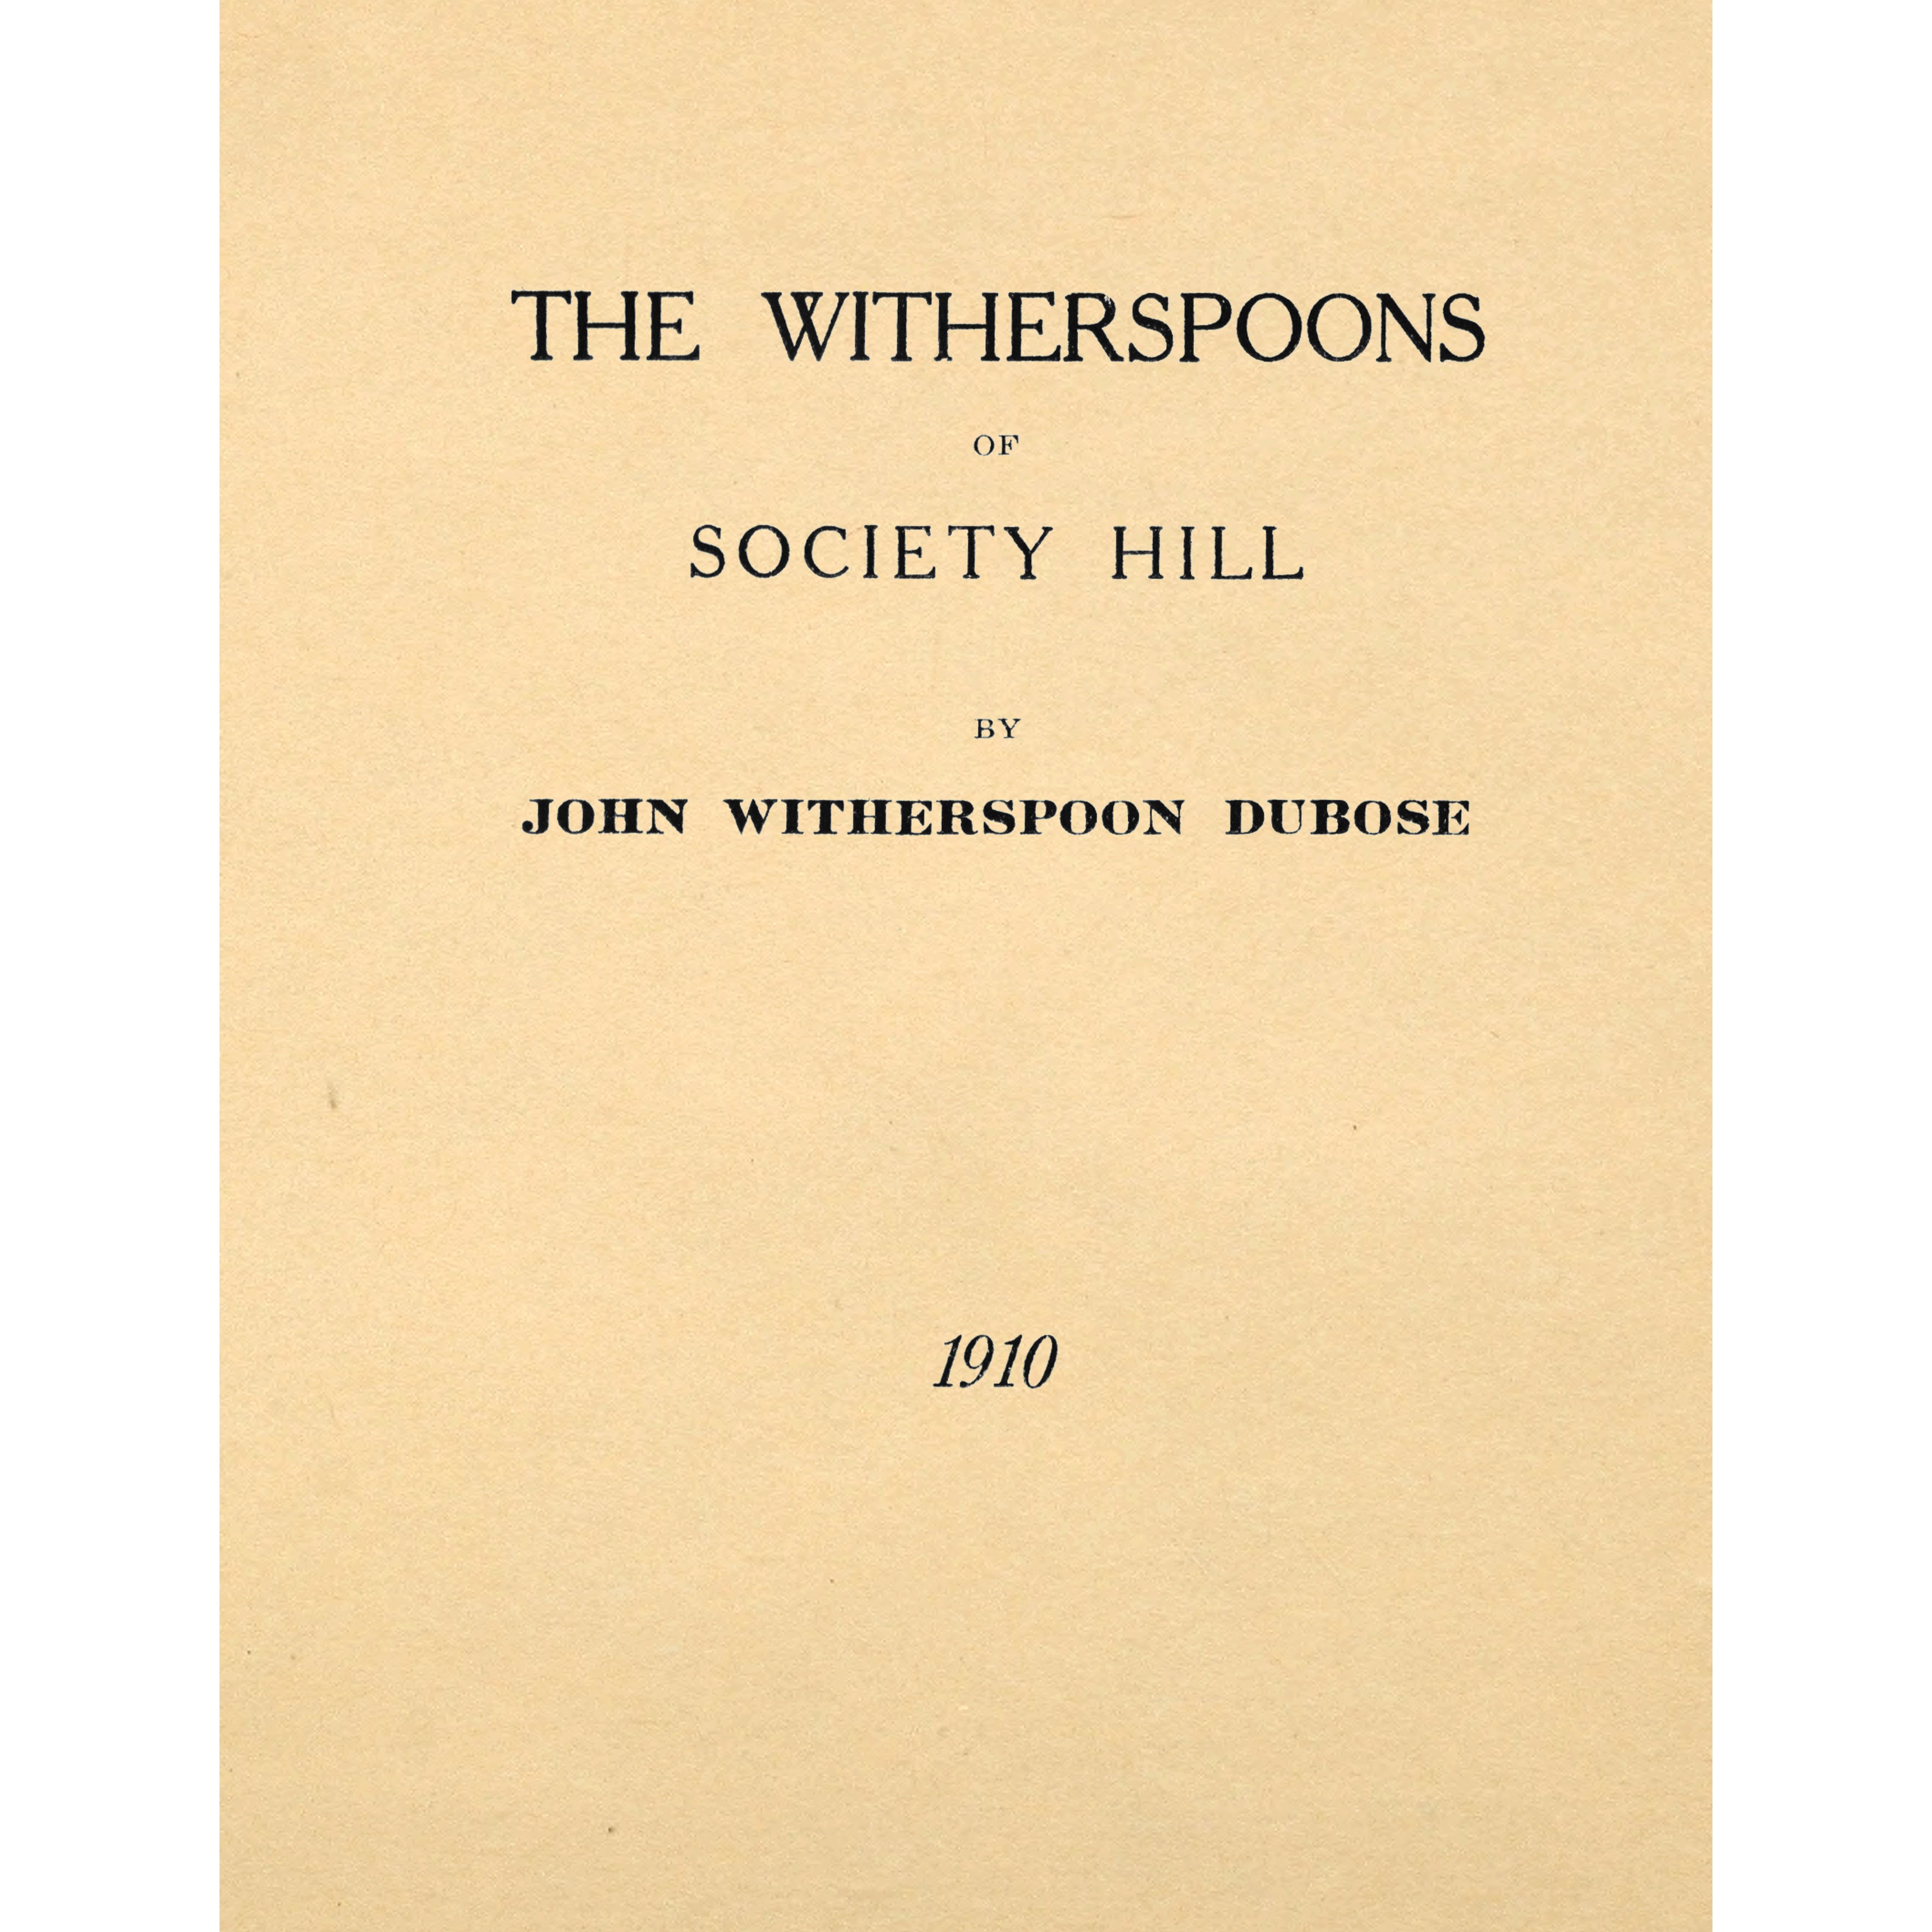 The Witherspoons of Society Hill [Pee Dee River, South Carolina]